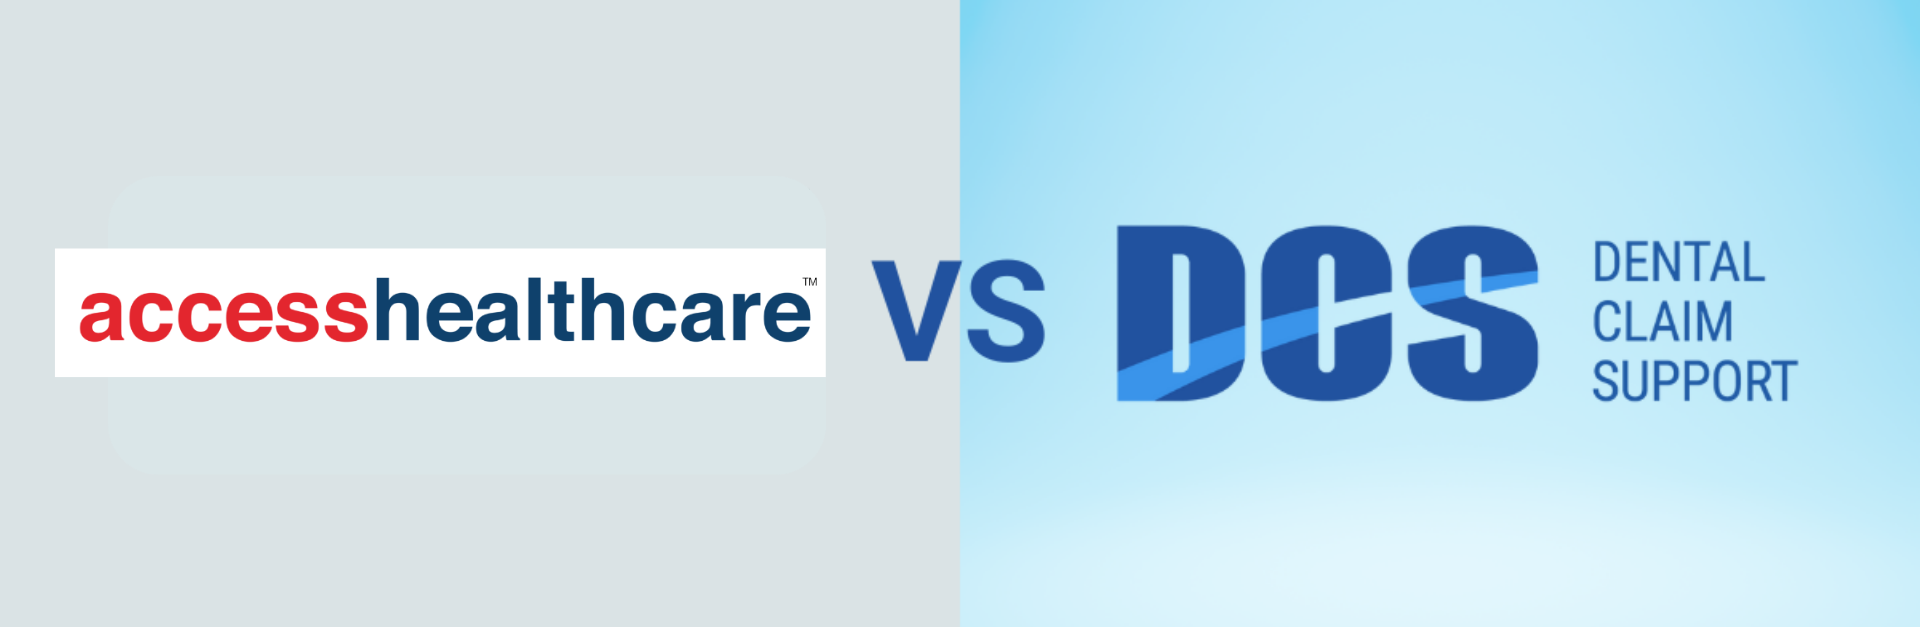 DCS vs Access Healthcare: Let's compare two top RCM companies [2 of 10]